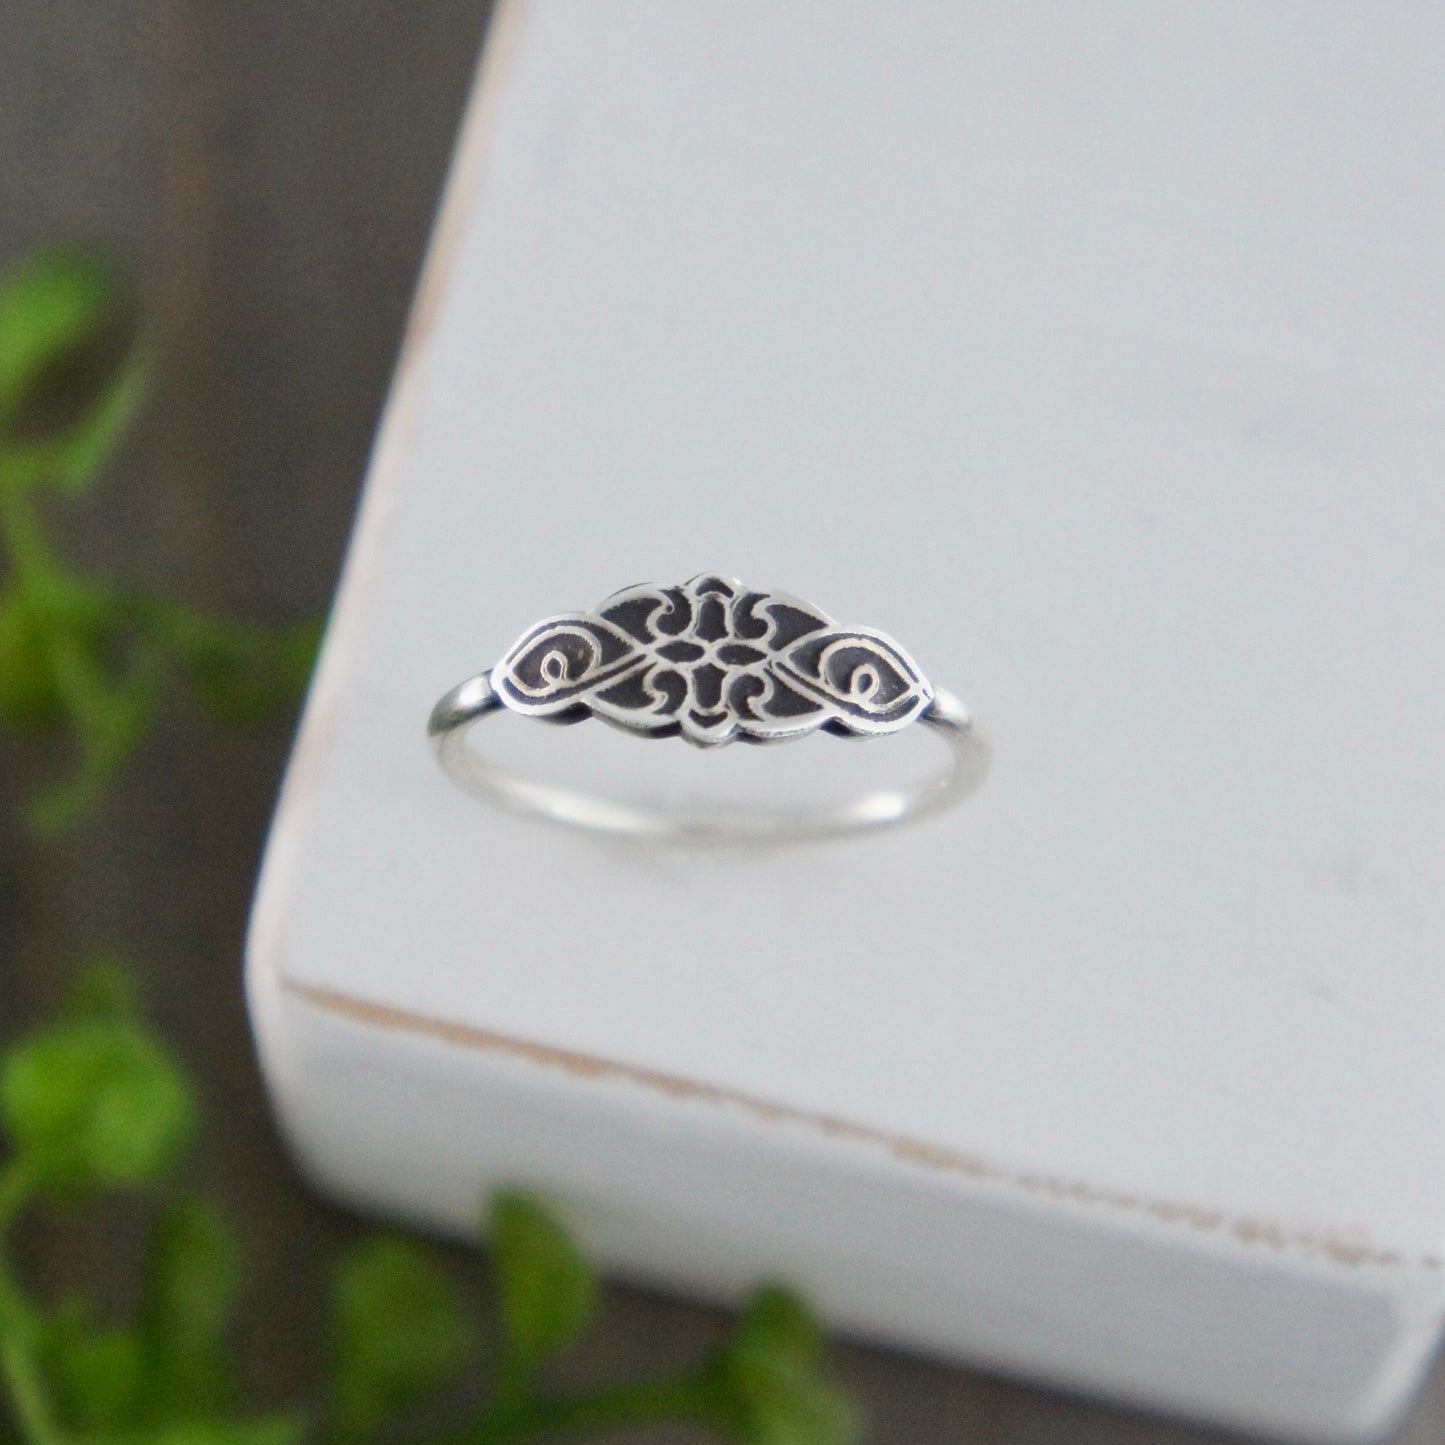 Sterling Silver Filigree Top Ring